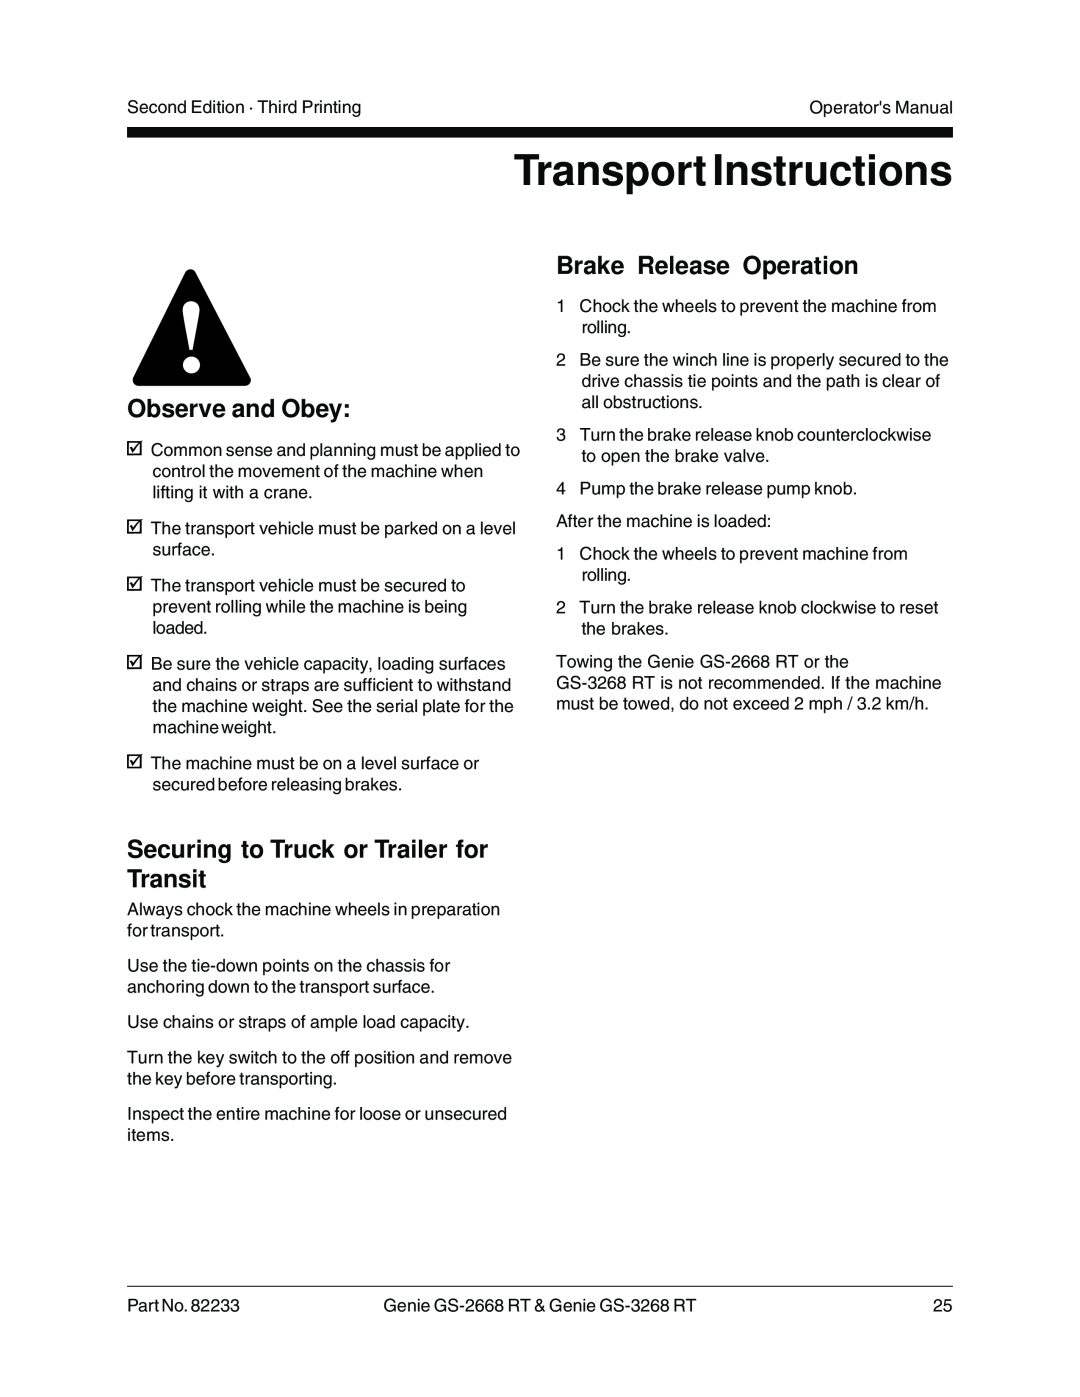 Genie GS-3268 RT, GS-2668 RT Transport Instructions, Securing to Truck or Trailer for Transit, Brake Release Operation 